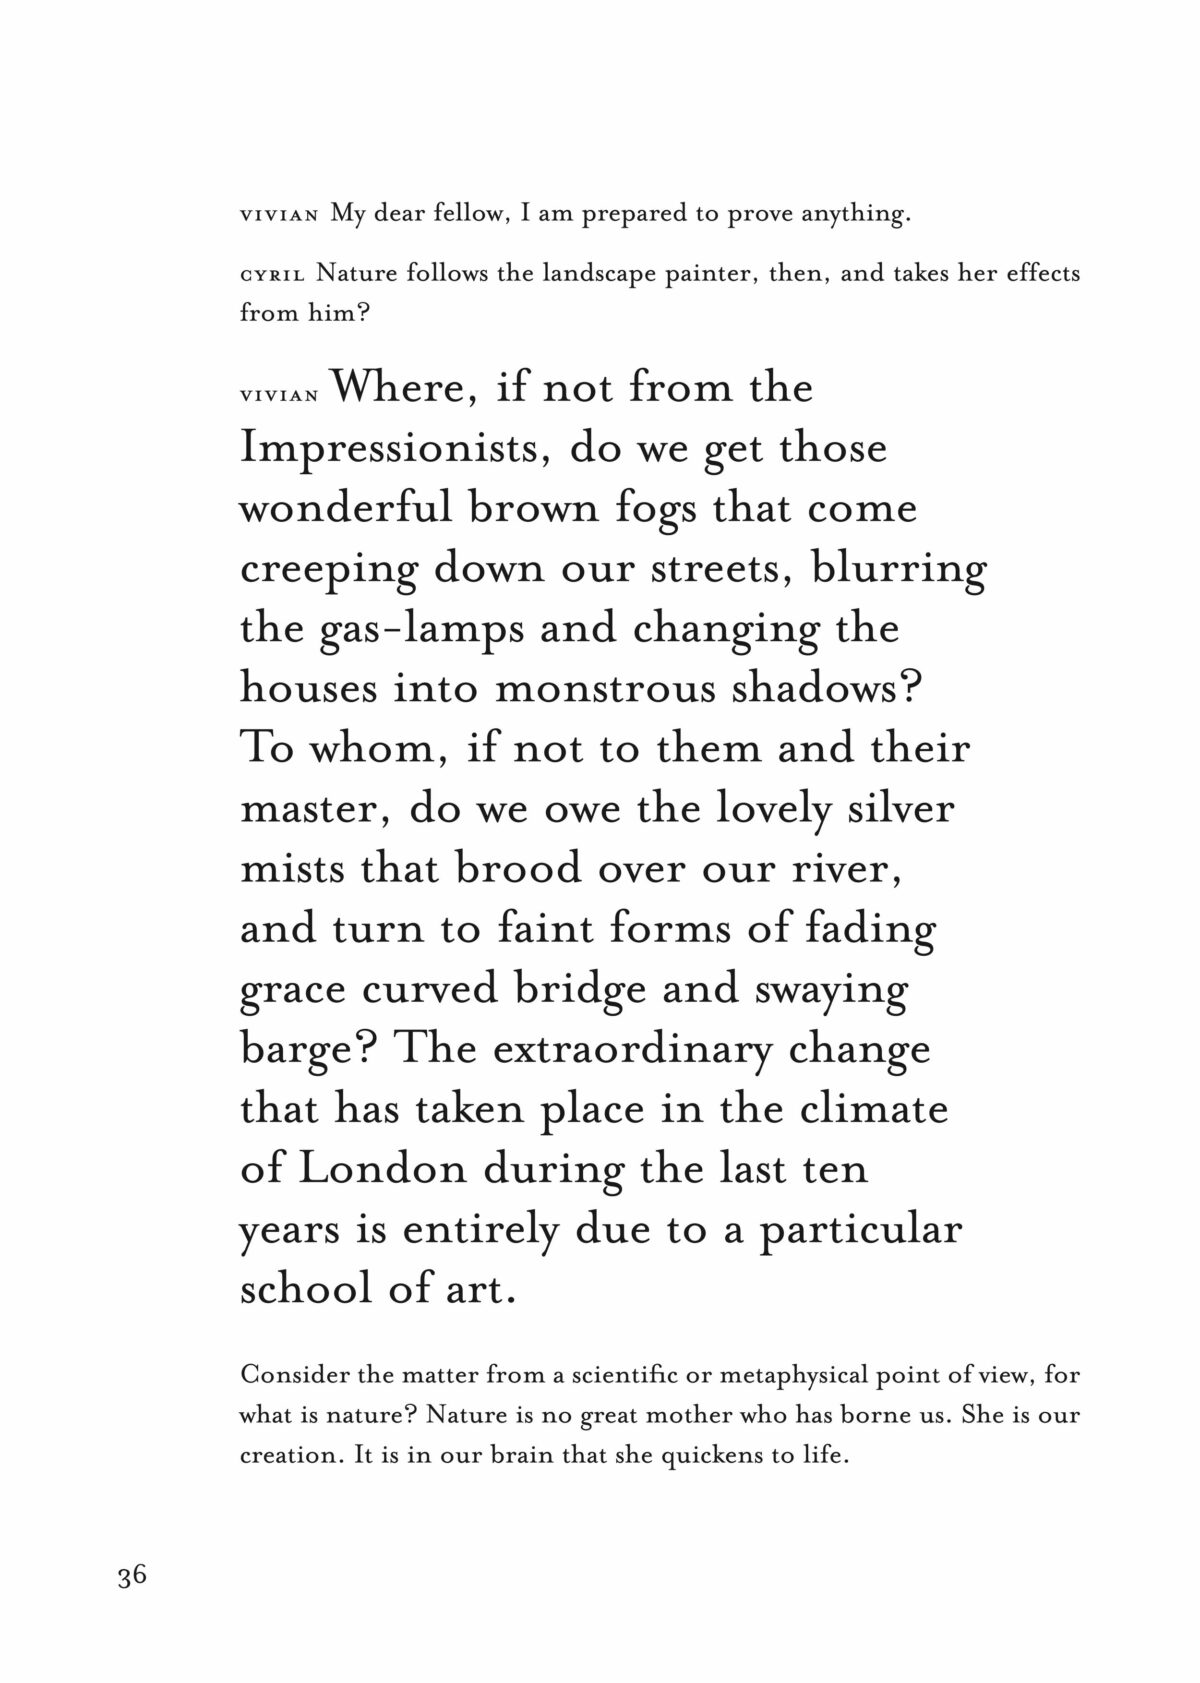 dialogue with selected passages by Vivian in larger type; see excerpt below for full text